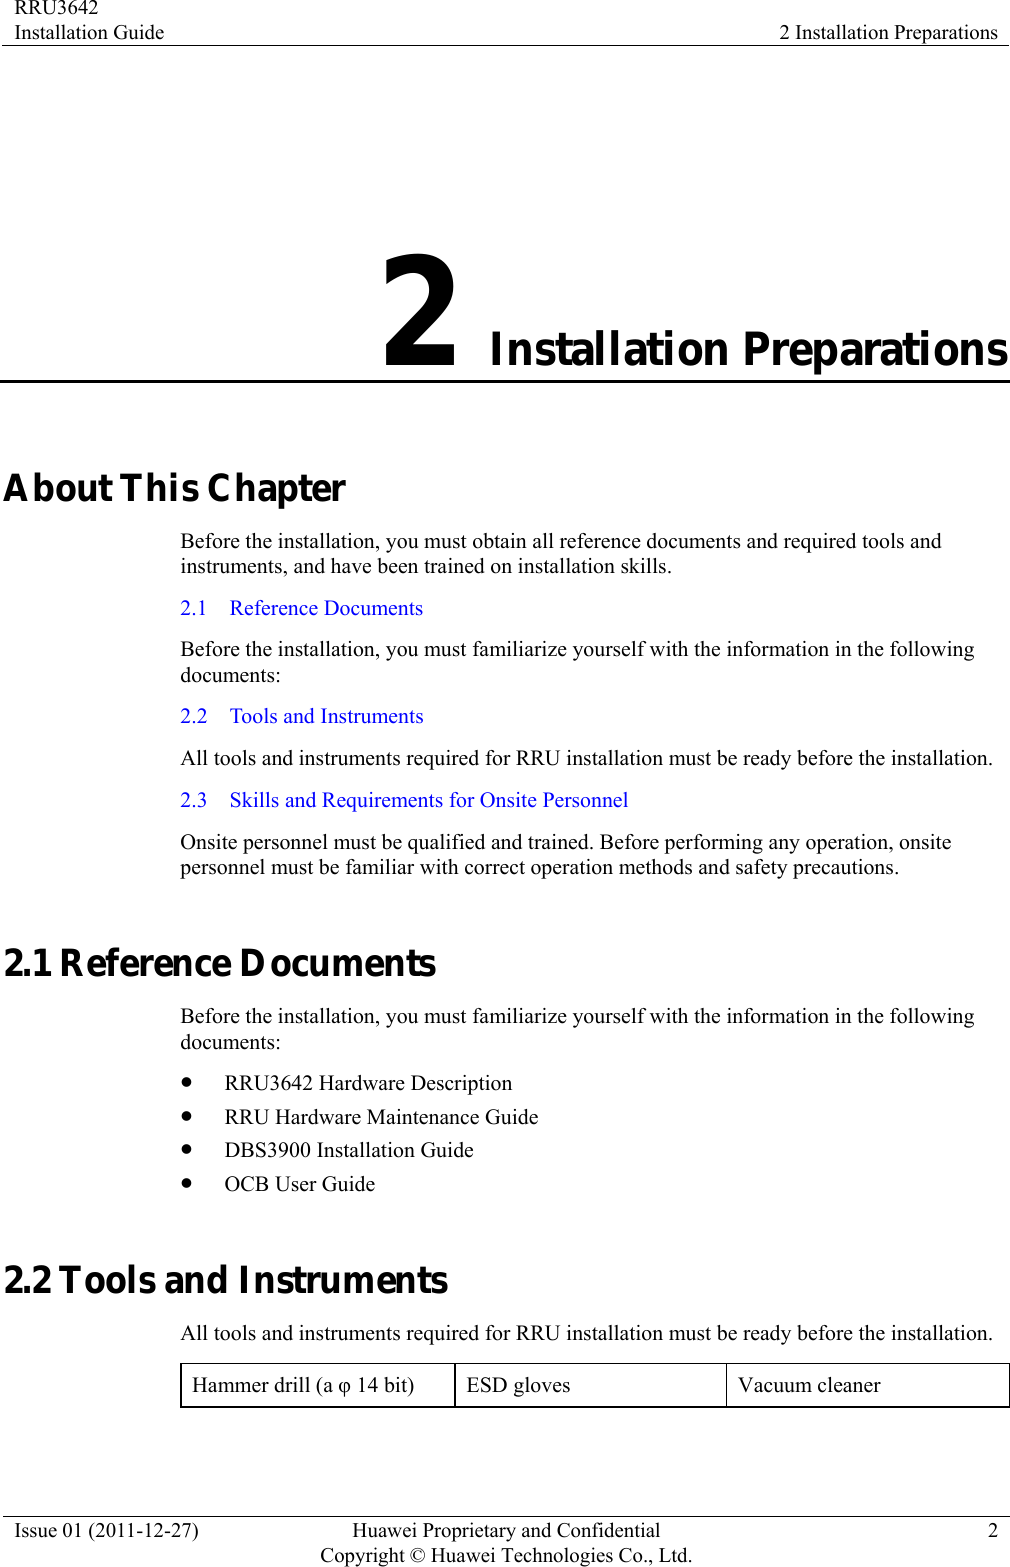 RRU3642 Installation Guide  2 Installation Preparations Issue 01 (2011-12-27)  Huawei Proprietary and Confidential         Copyright © Huawei Technologies Co., Ltd.2 2 Installation Preparations About This Chapter Before the installation, you must obtain all reference documents and required tools and instruments, and have been trained on installation skills.   2.1  Reference Documents Before the installation, you must familiarize yourself with the information in the following documents:  2.2    Tools and Instruments All tools and instruments required for RRU installation must be ready before the installation. 2.3    Skills and Requirements for Onsite Personnel Onsite personnel must be qualified and trained. Before performing any operation, onsite personnel must be familiar with correct operation methods and safety precautions. 2.1 Reference Documents Before the installation, you must familiarize yourself with the information in the following documents:  z RRU3642 Hardware Description z RRU Hardware Maintenance Guide z DBS3900 Installation Guide z OCB User Guide 2.2 Tools and Instruments All tools and instruments required for RRU installation must be ready before the installation. Hammer drill (a φ 14 bit)  ESD gloves  Vacuum cleaner 